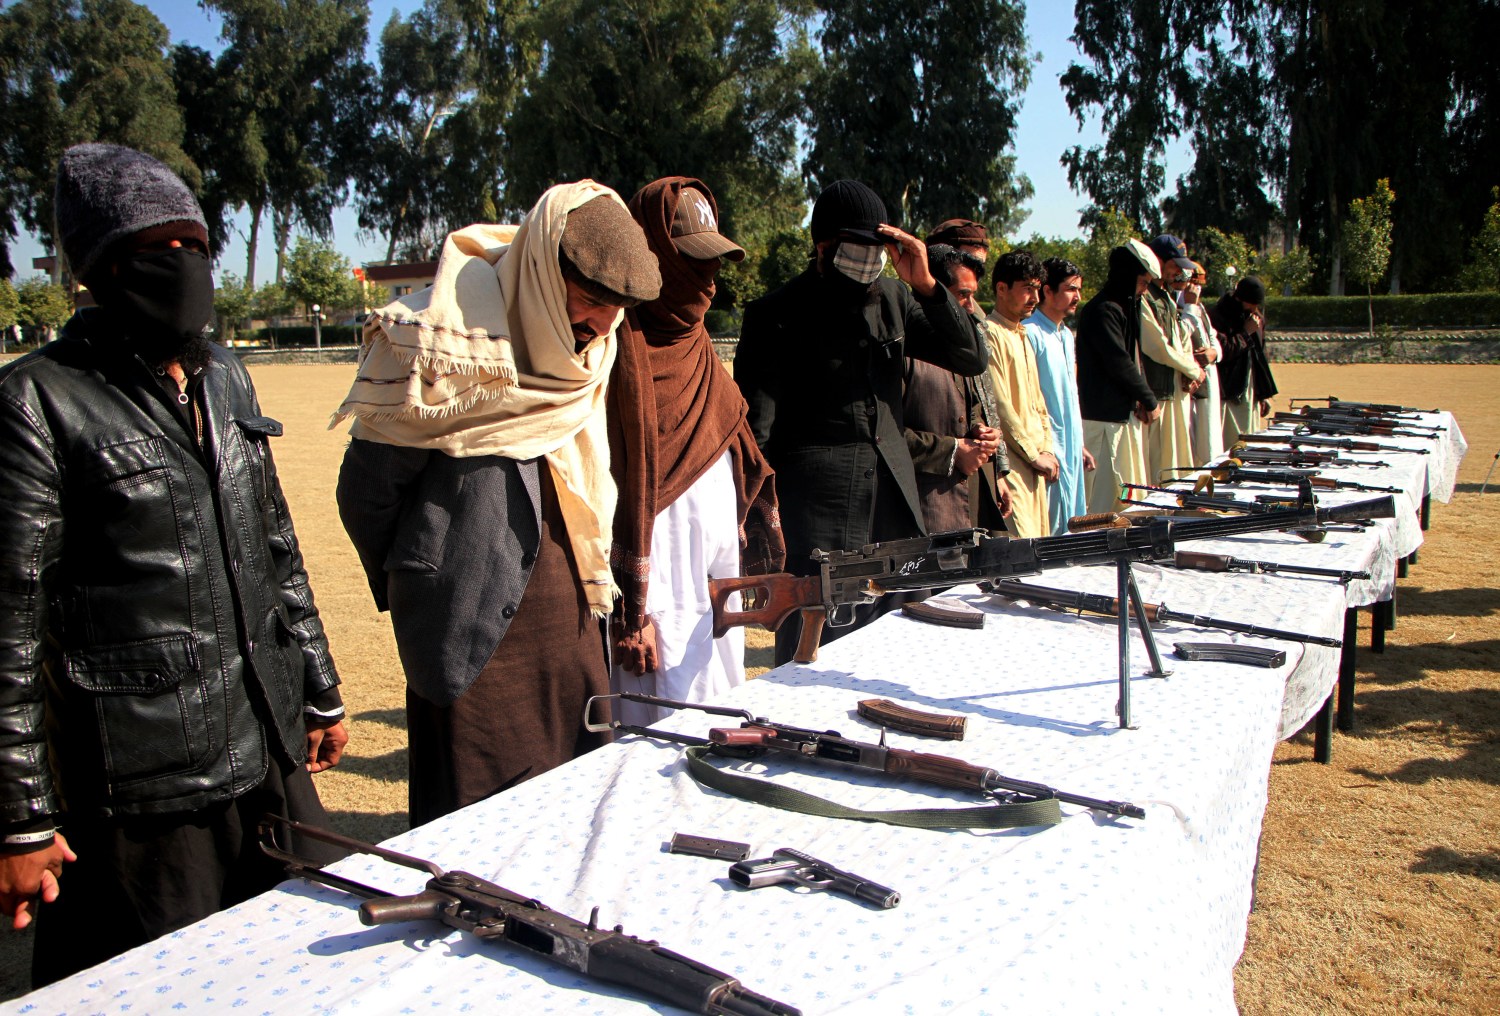 NANGARHAR, AFGHANISTAN.- Taliban fighters attend a surrender ceremony in Jalalabad city, capital of Nangarhar province, Afghanistan, Feb. 8, 2020. A total of 28 Taliban fighters have given up fighting and surrendered to security forces in the eastern Nangarhar province on Saturday, provincial governor Shah Mahmoud Miakhil said.